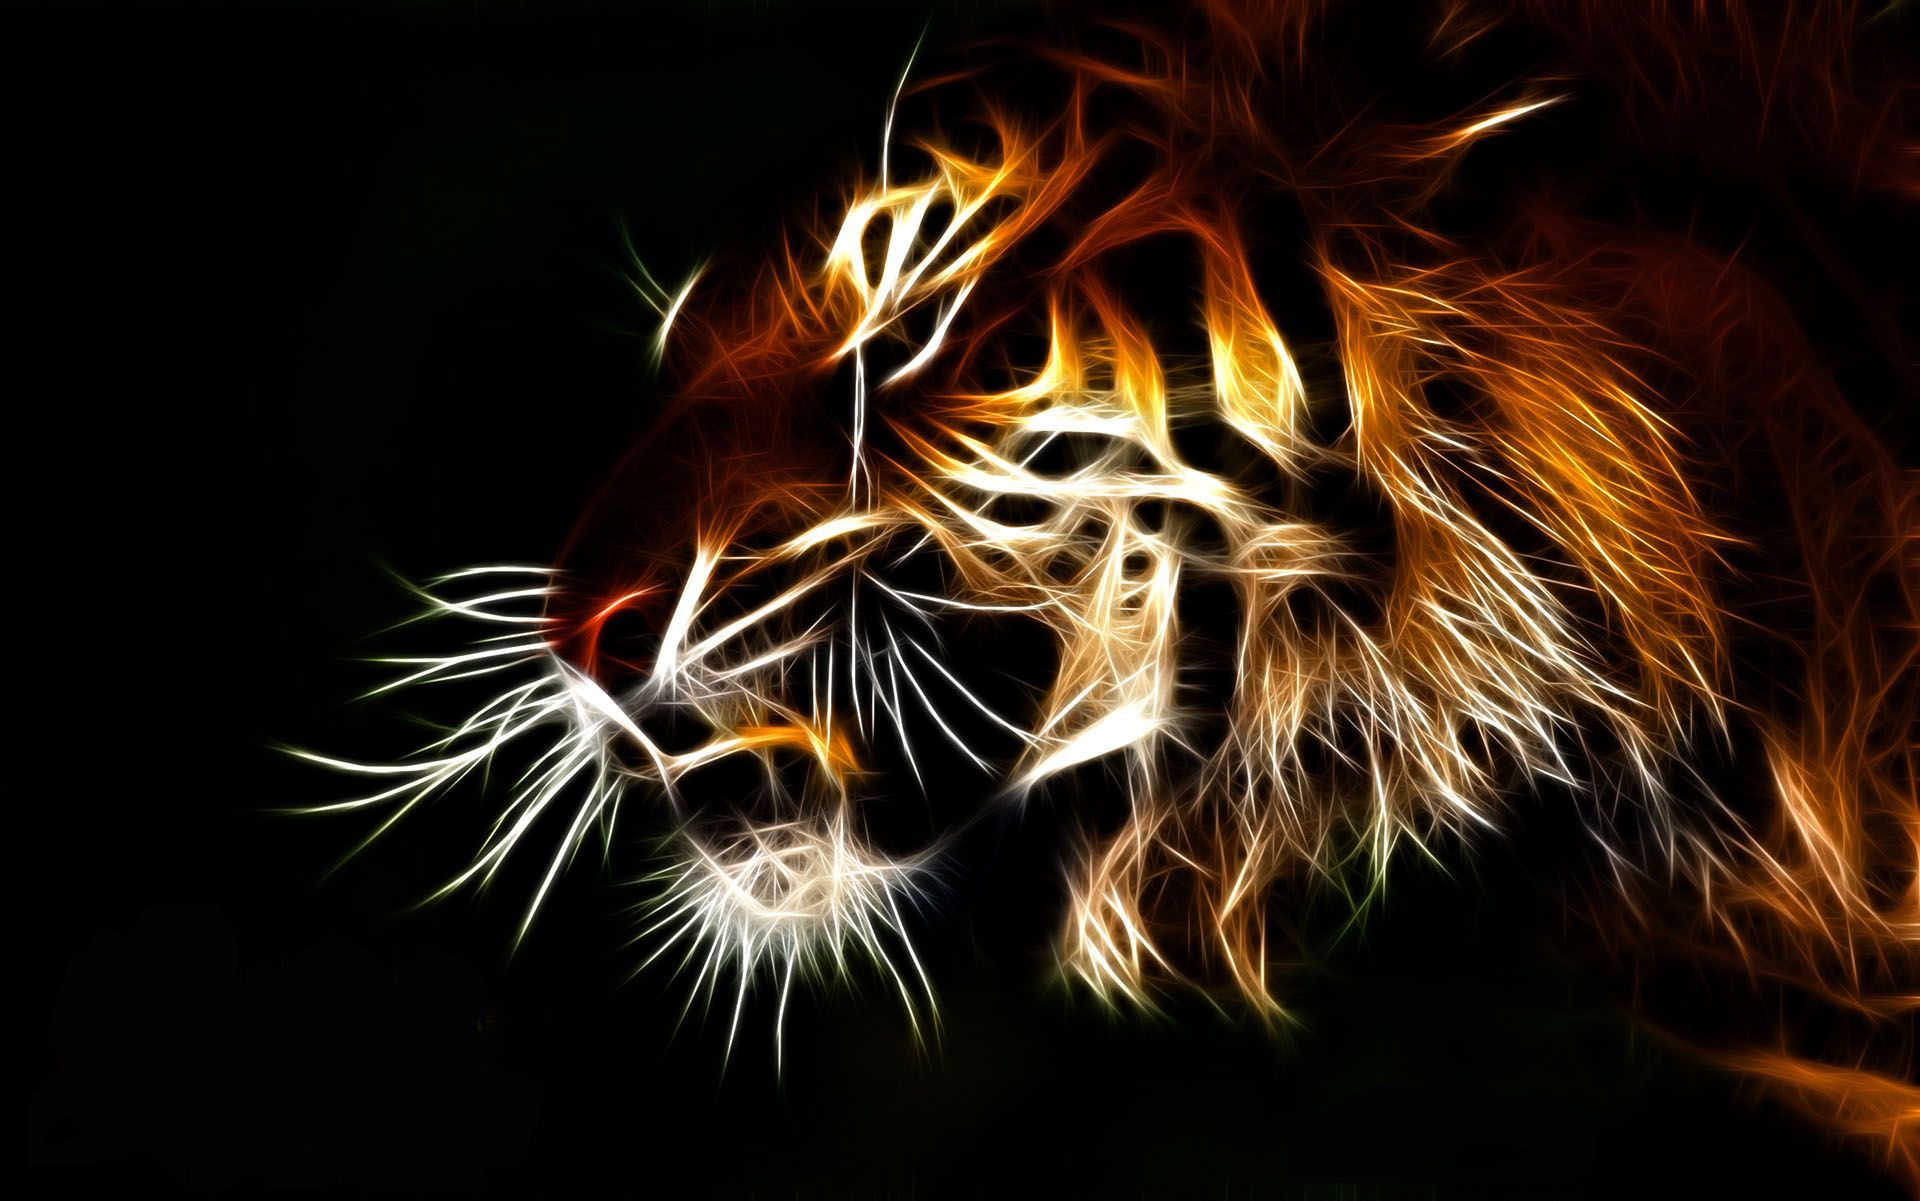 Free download Cool Neon Tiger Background Image amp Picture